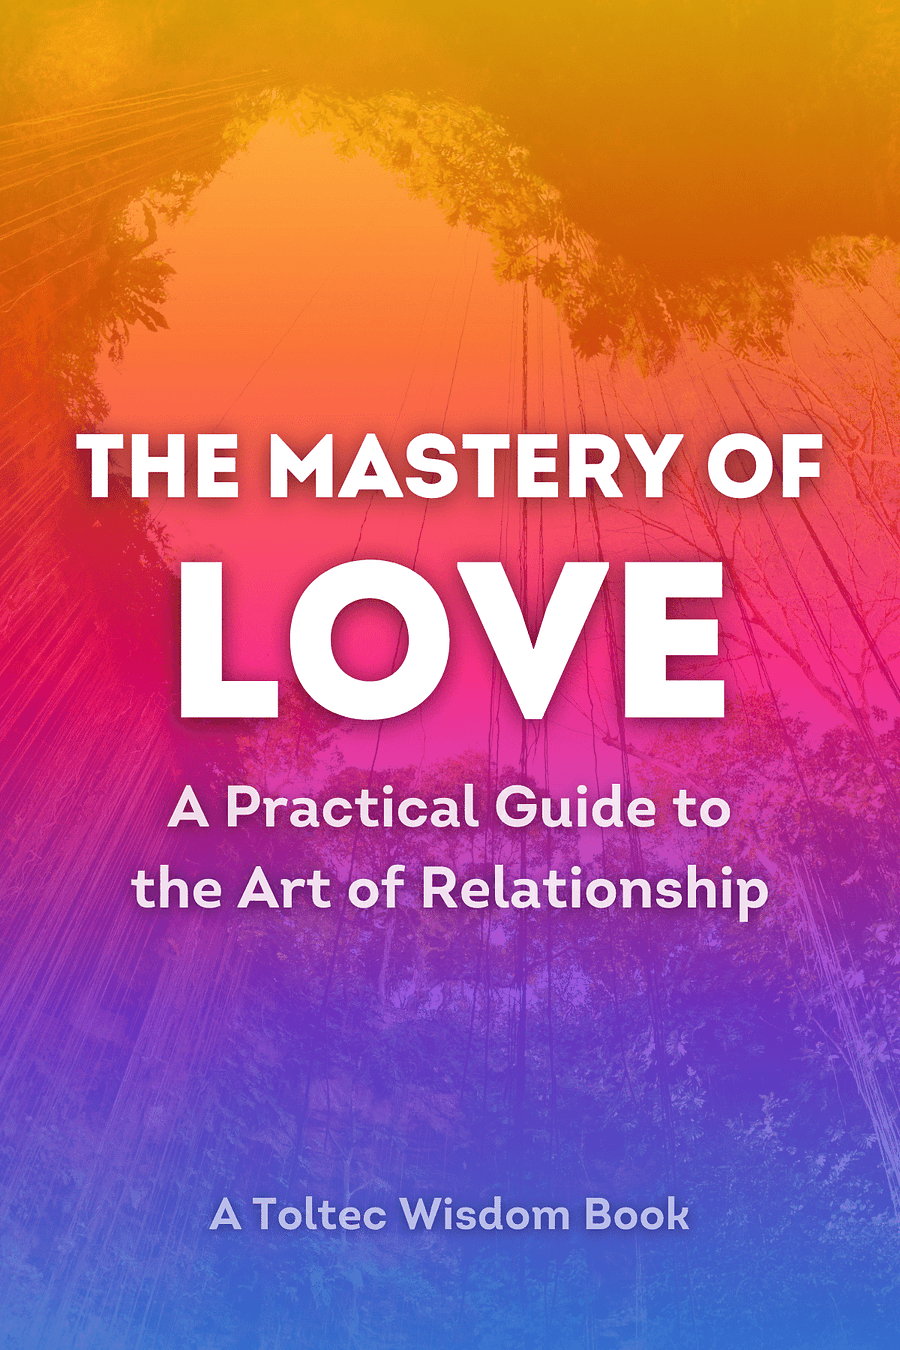 The Mastery of Love by Don Miguel Ruiz, Janet Mills - Book Summary